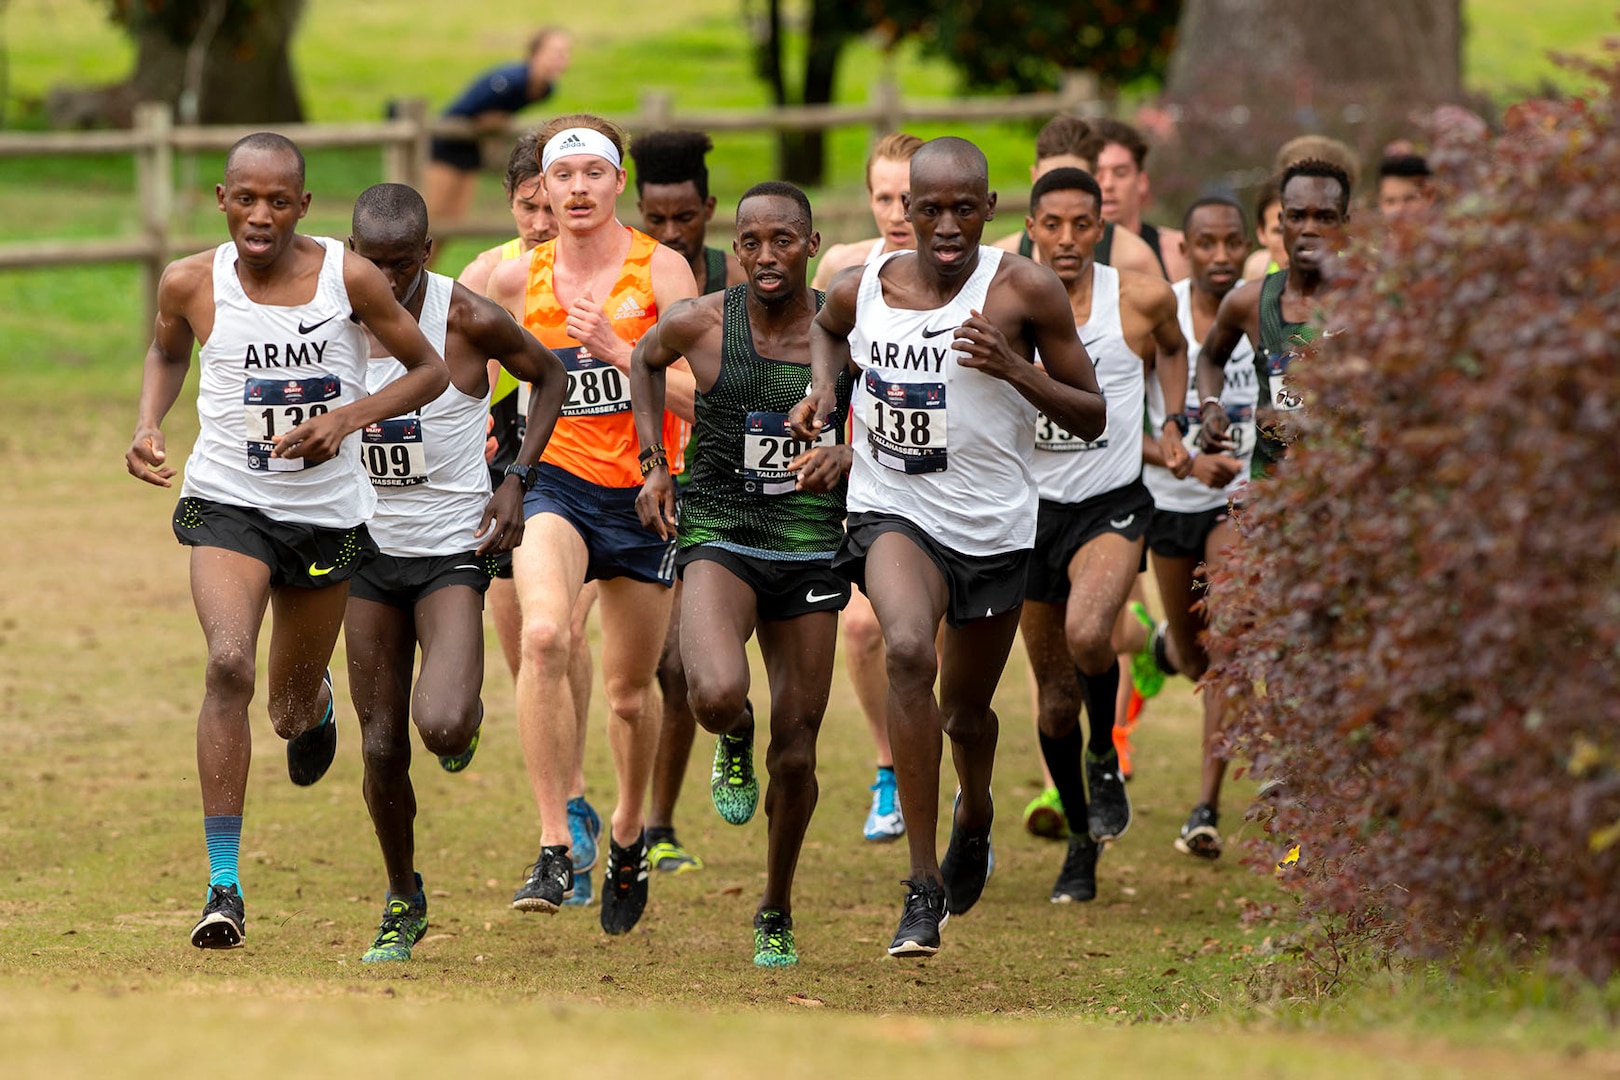 Bor brothers lead Army to Cross Country championship > Armed Forces